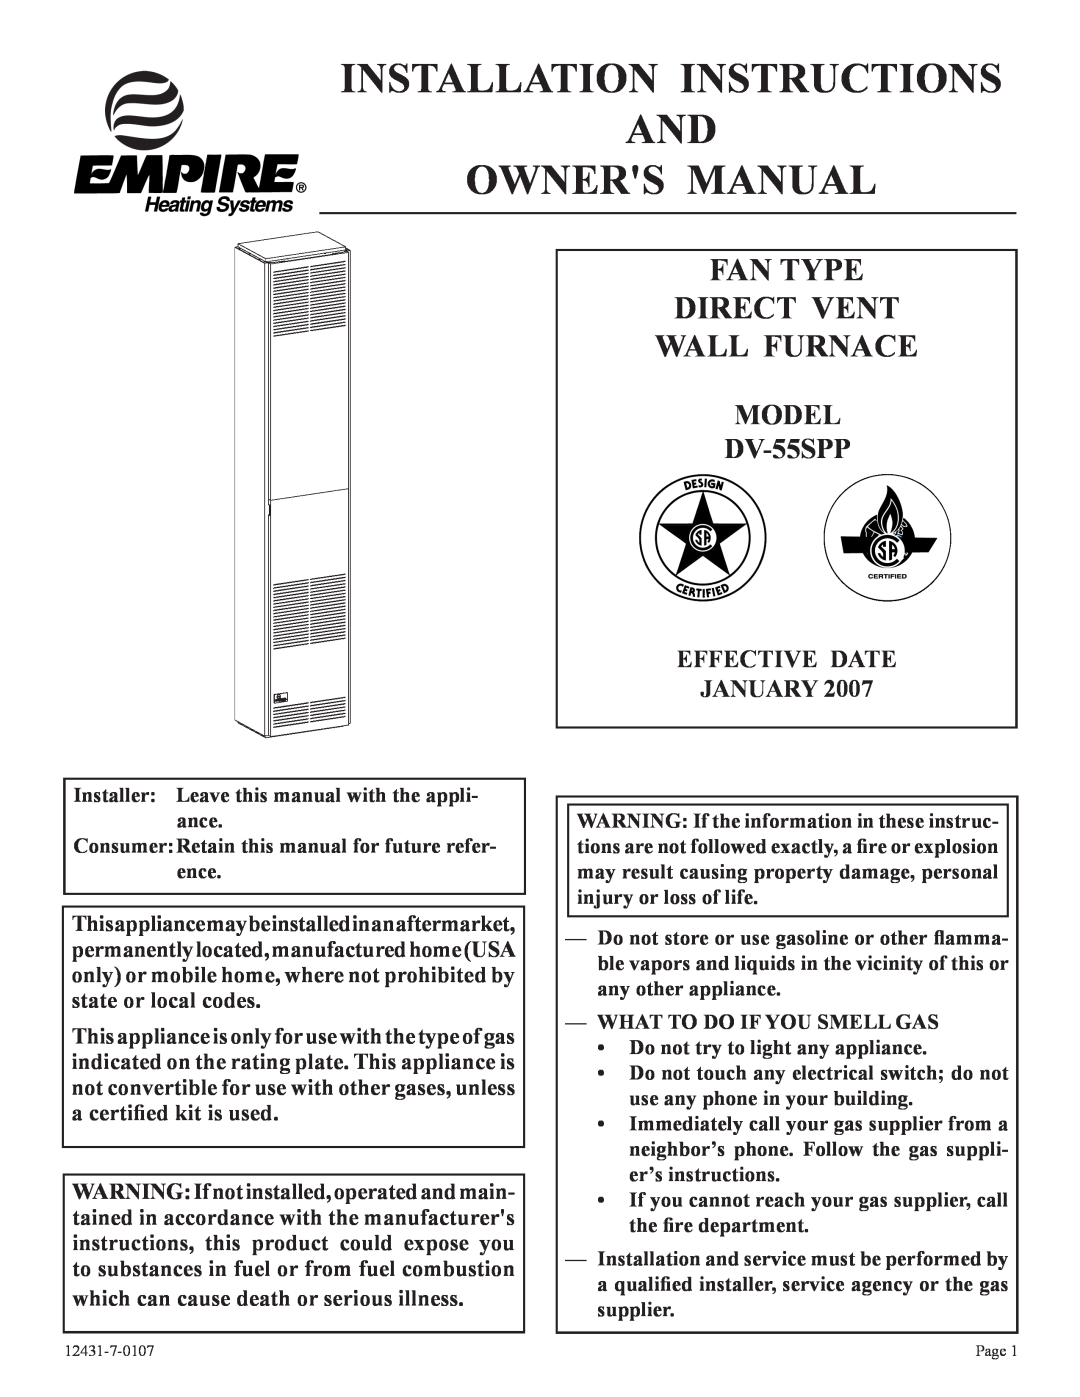 Langley/Empire DV-55SPP installation instructions Fan Type Direct Vent Wall Furnace, Effective Date January 